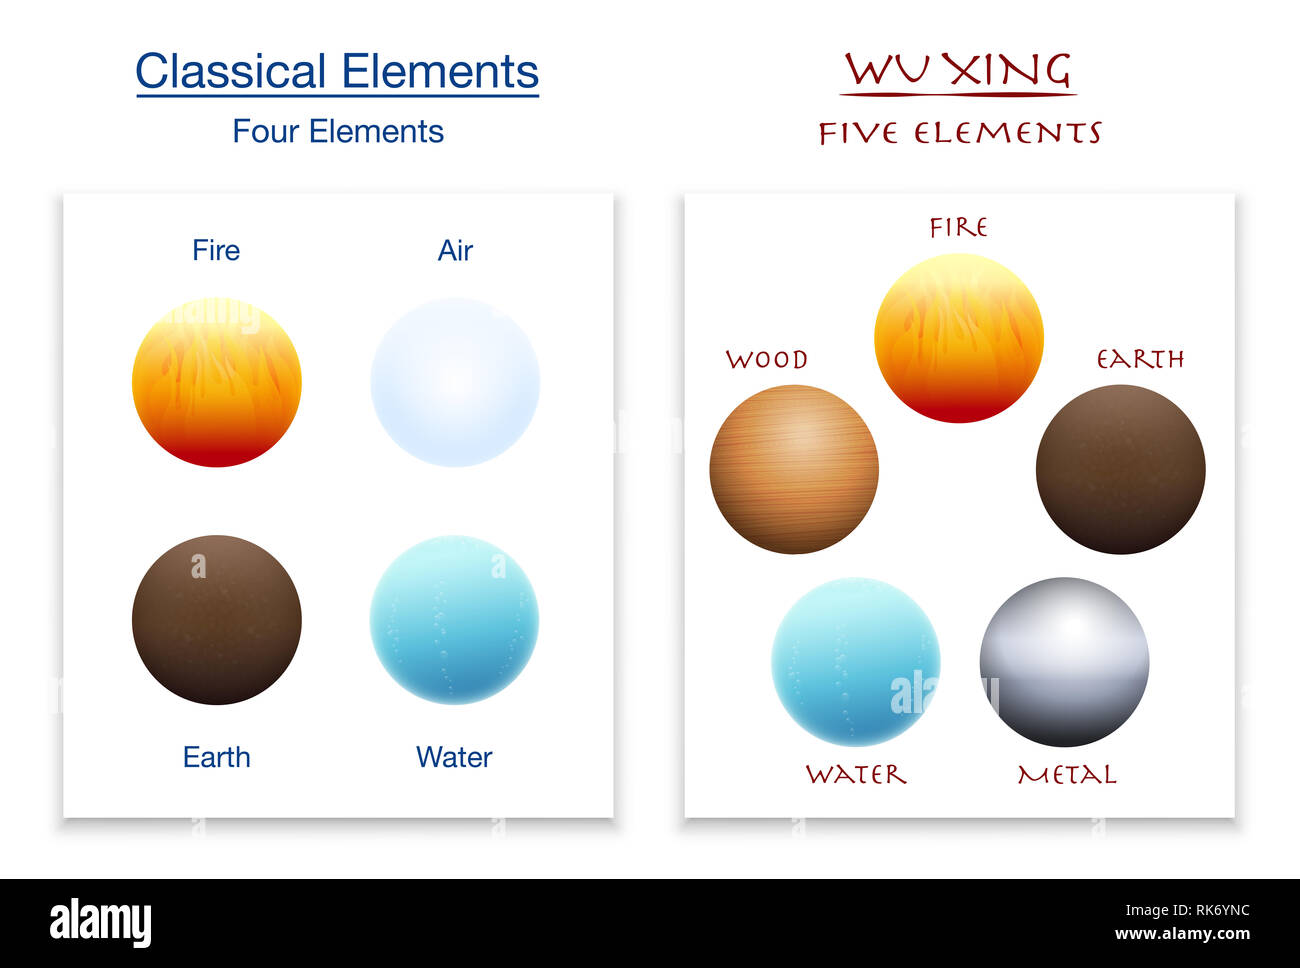 Classical four elements and five elements of Wu Xing in comparison - illustration on white background. Stock Photo